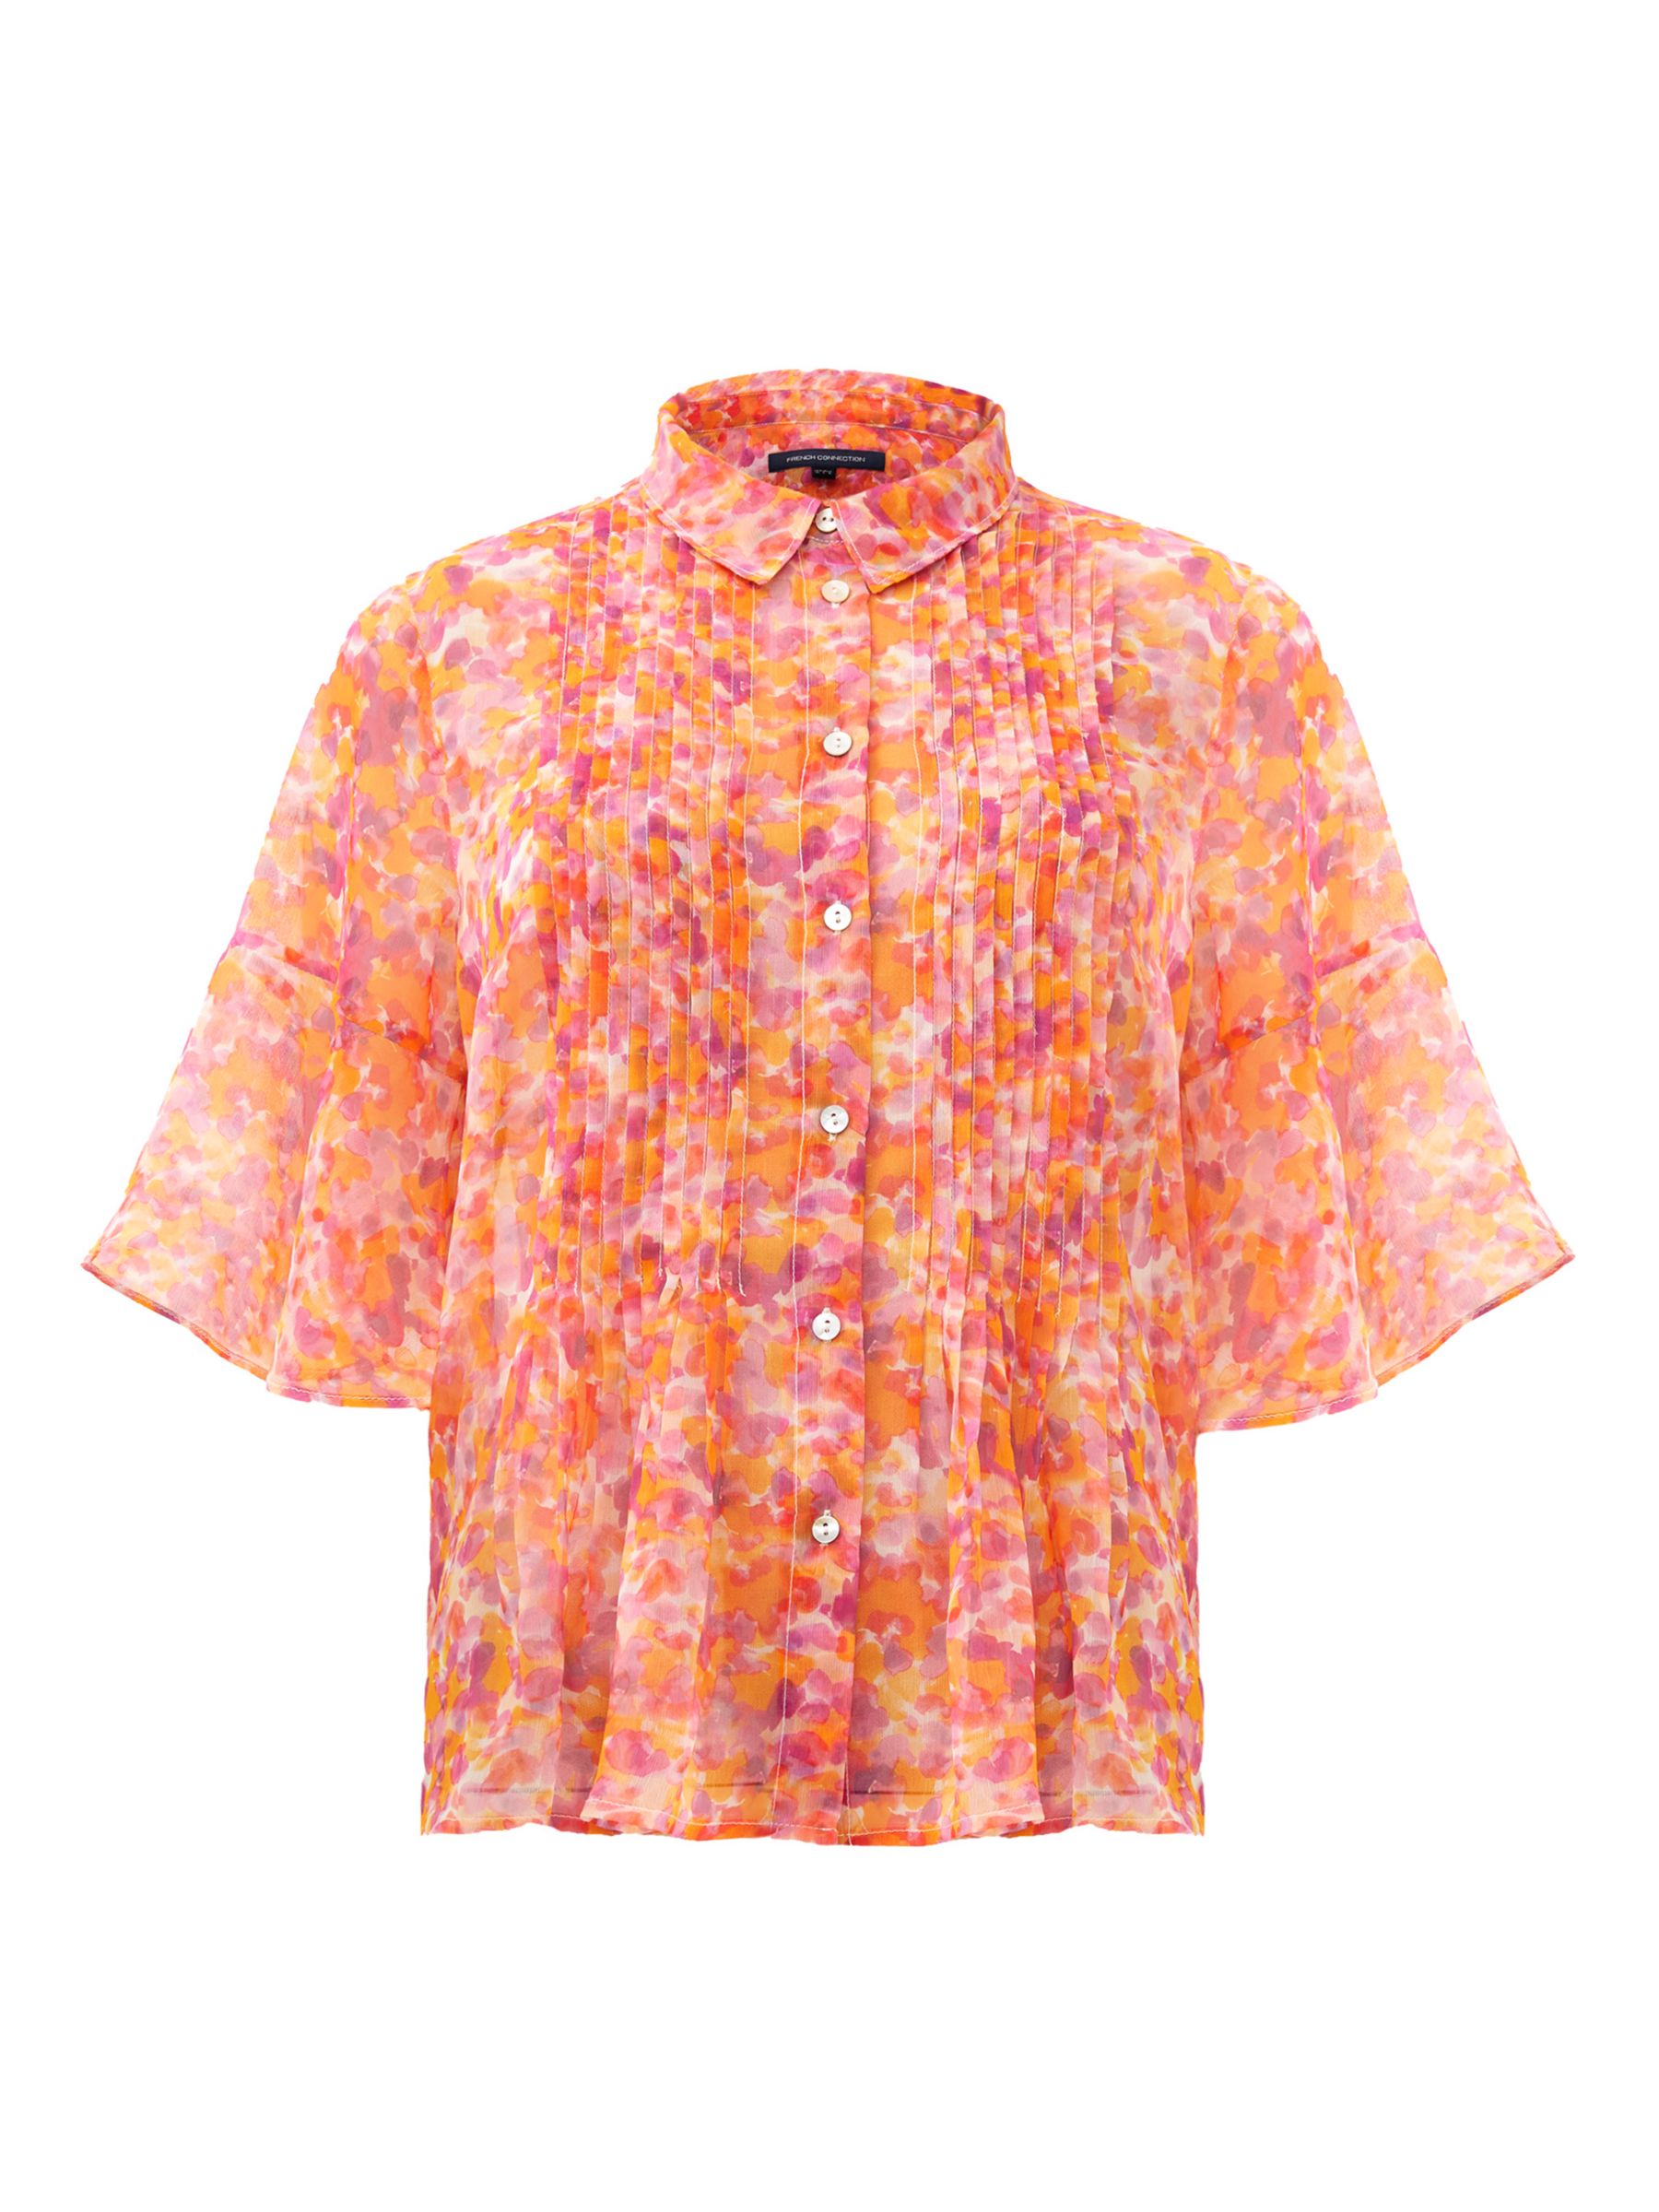 Buy French Connection Cass Hallie Pintuck Blouse, Persimmon Online at johnlewis.com